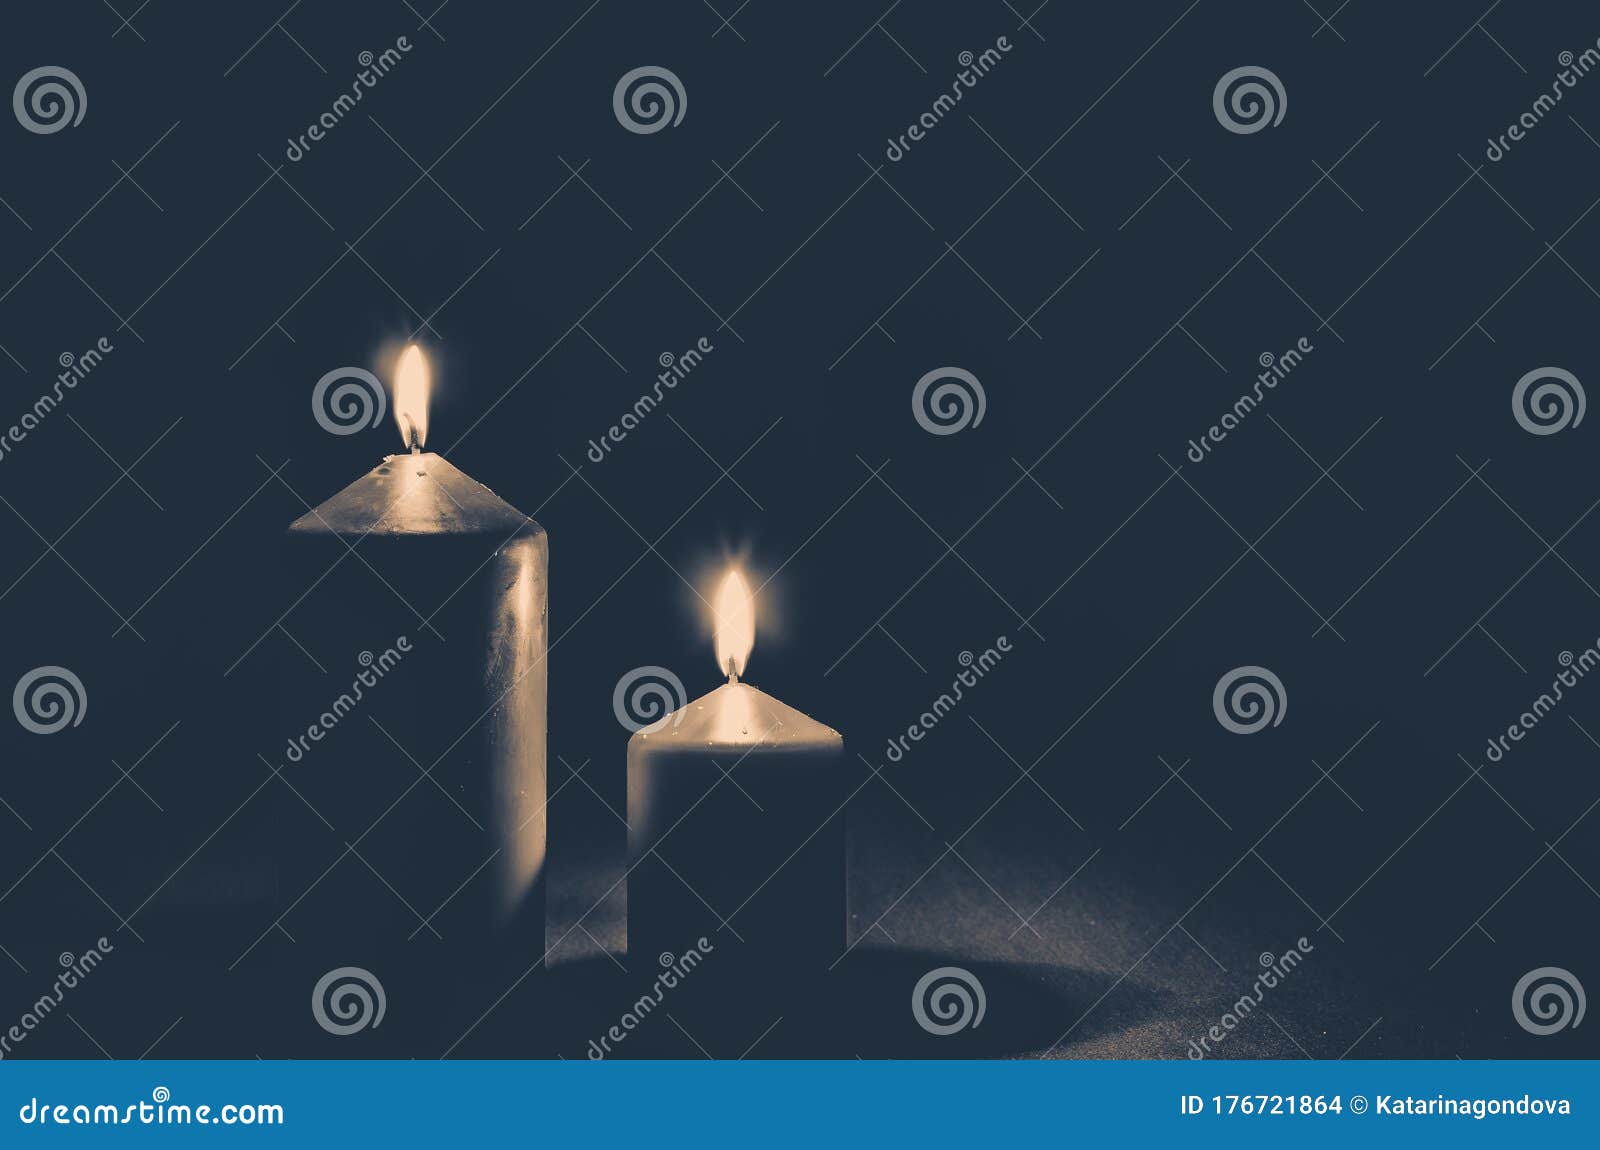 Burial Concept with Two Golden Burning Candles Against Black Background ...